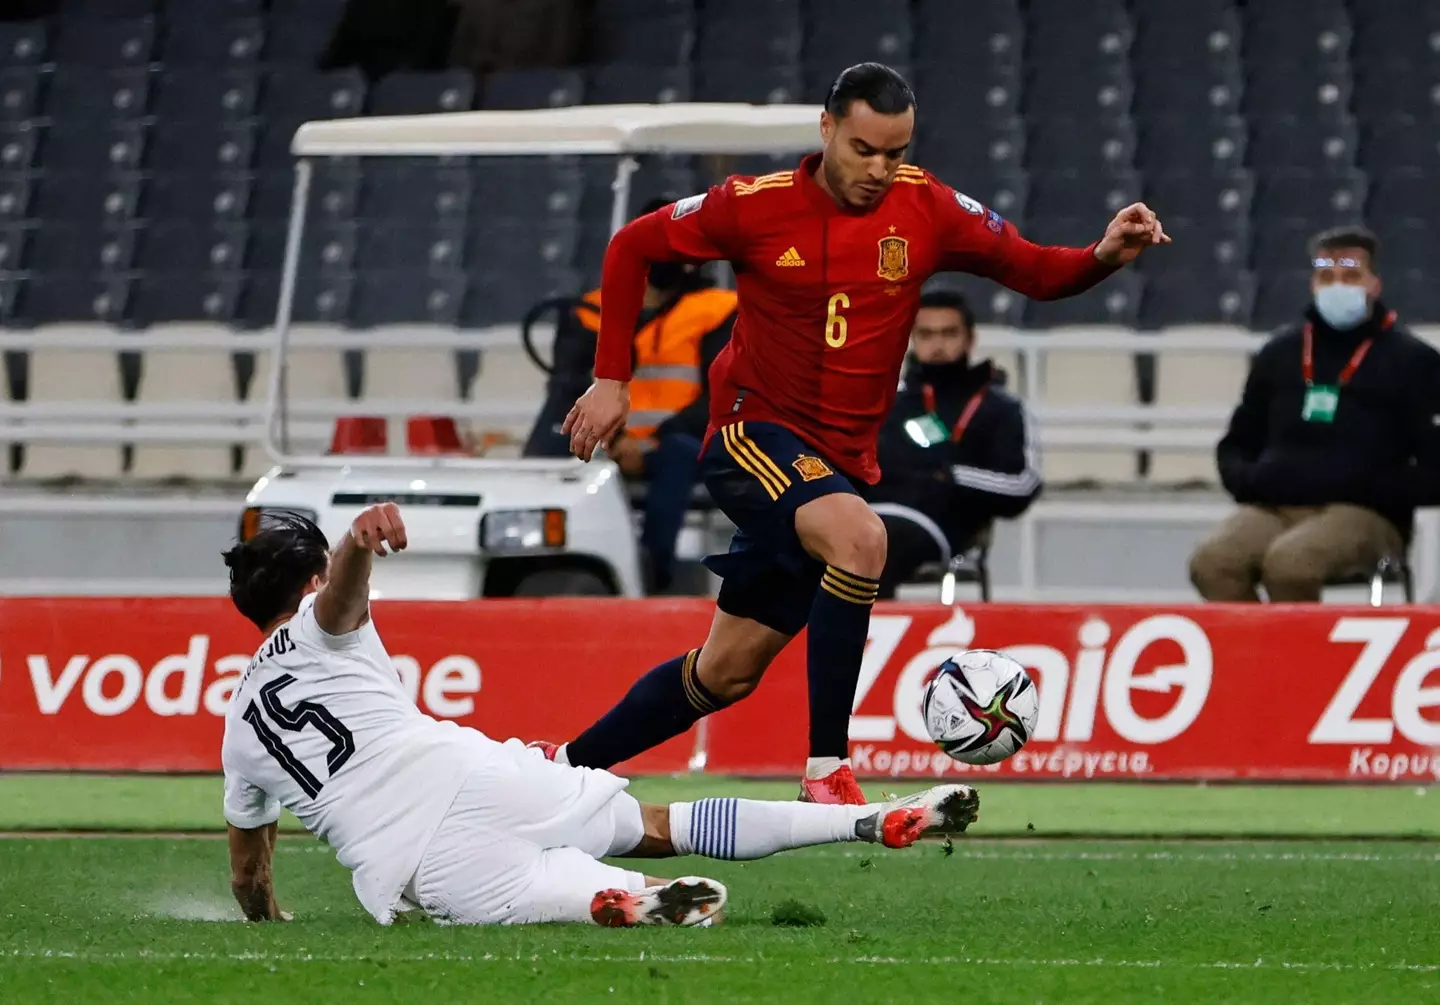 Raul de Tomas in action for Spain. (Image